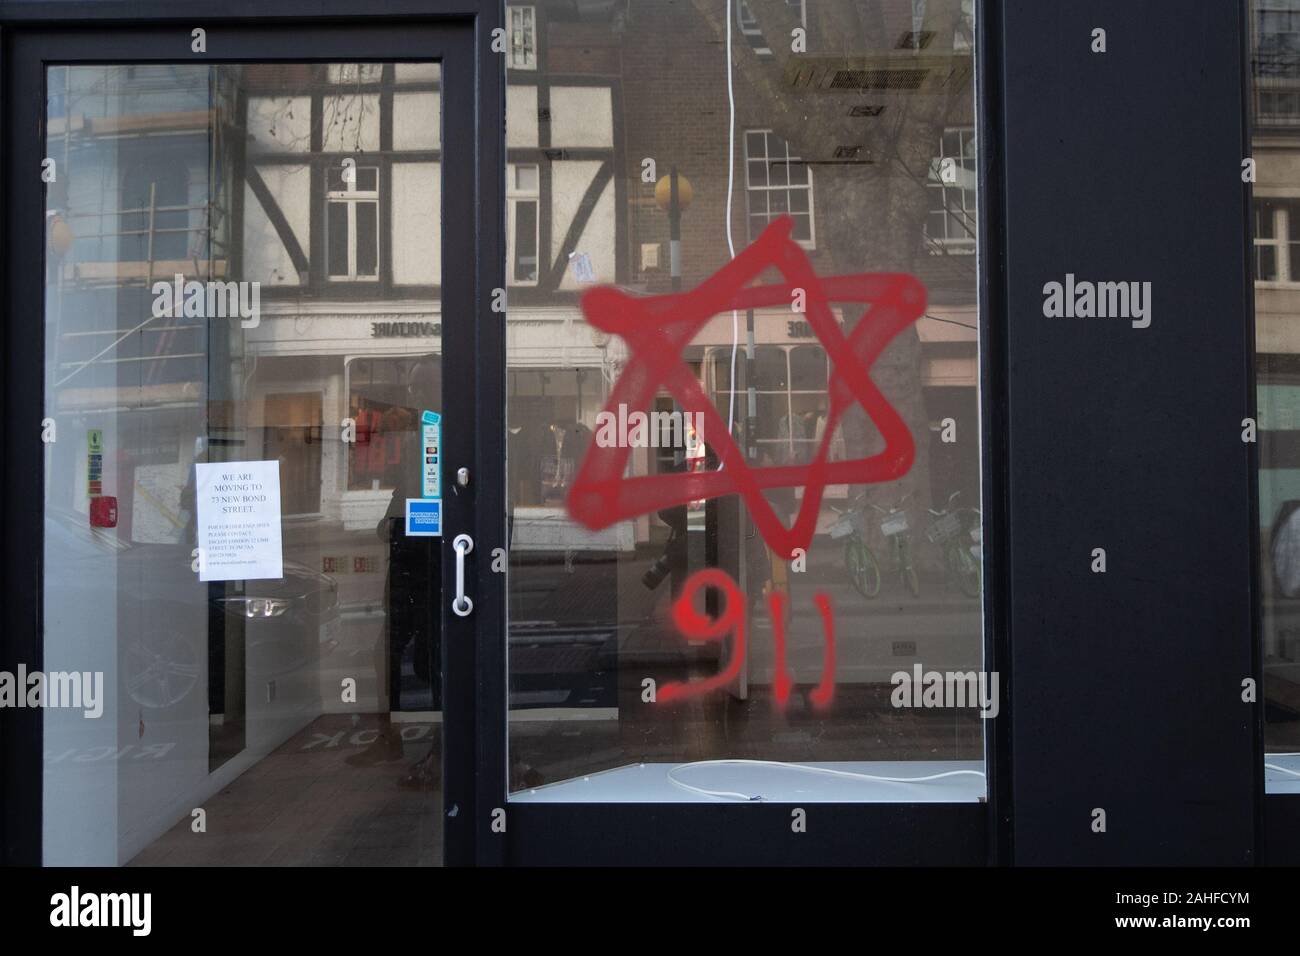 Anti-semitic graffiti in the form of numbers, 9 11, and a Star of David, on a shop window in Belsize Park, North London. Stock Photo